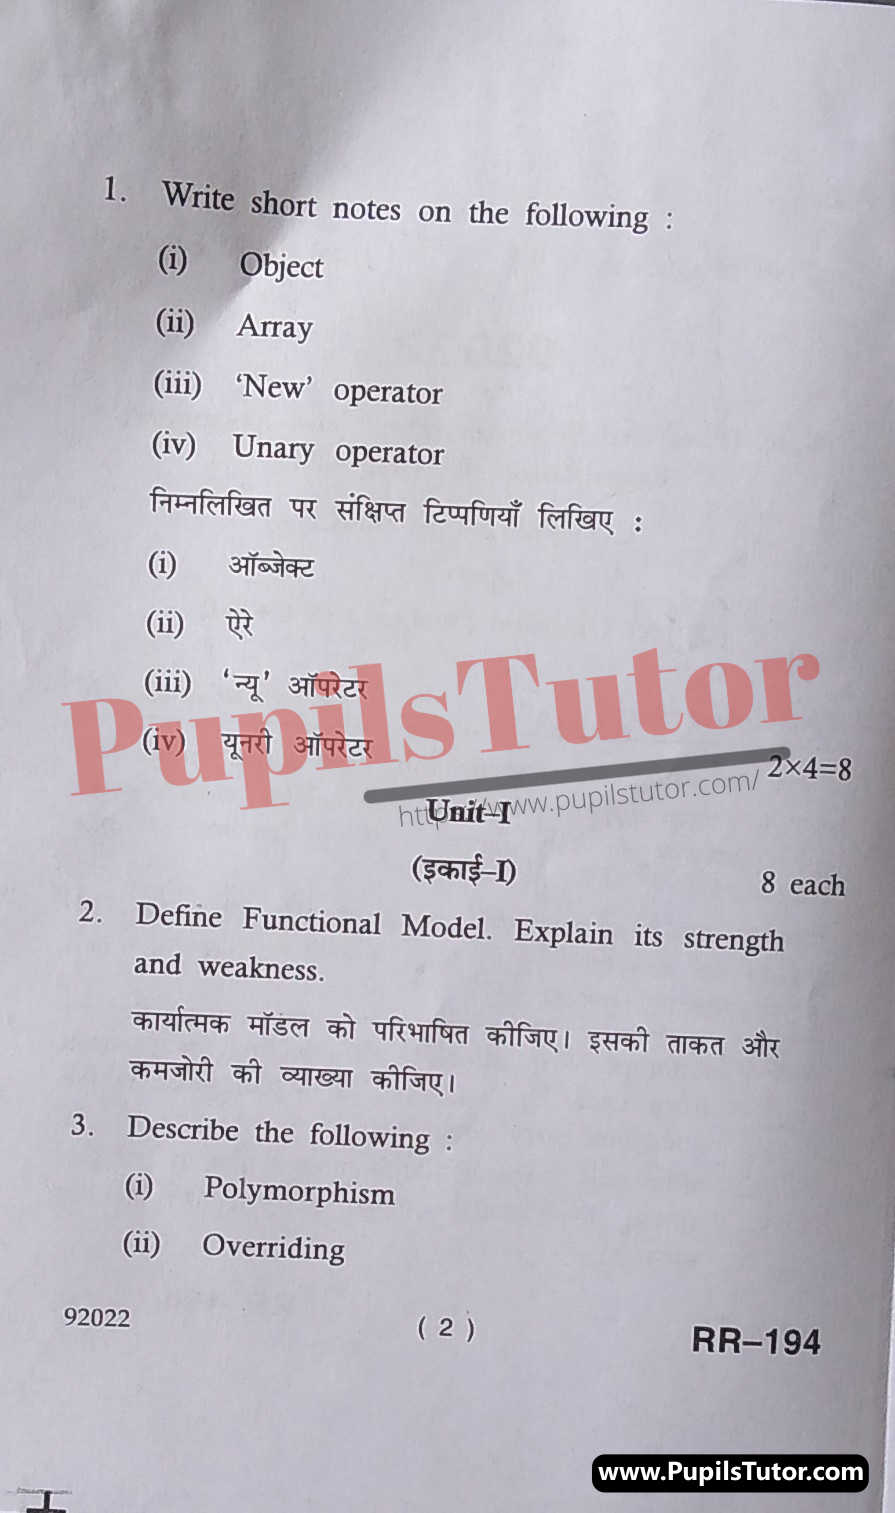 M.D. University B.Sc. [Computer Science] Object Oriented Design And C++ - I Third Semester Important Question Answer And Solution - www.pupilstutor.com (Paper Page Number 2)